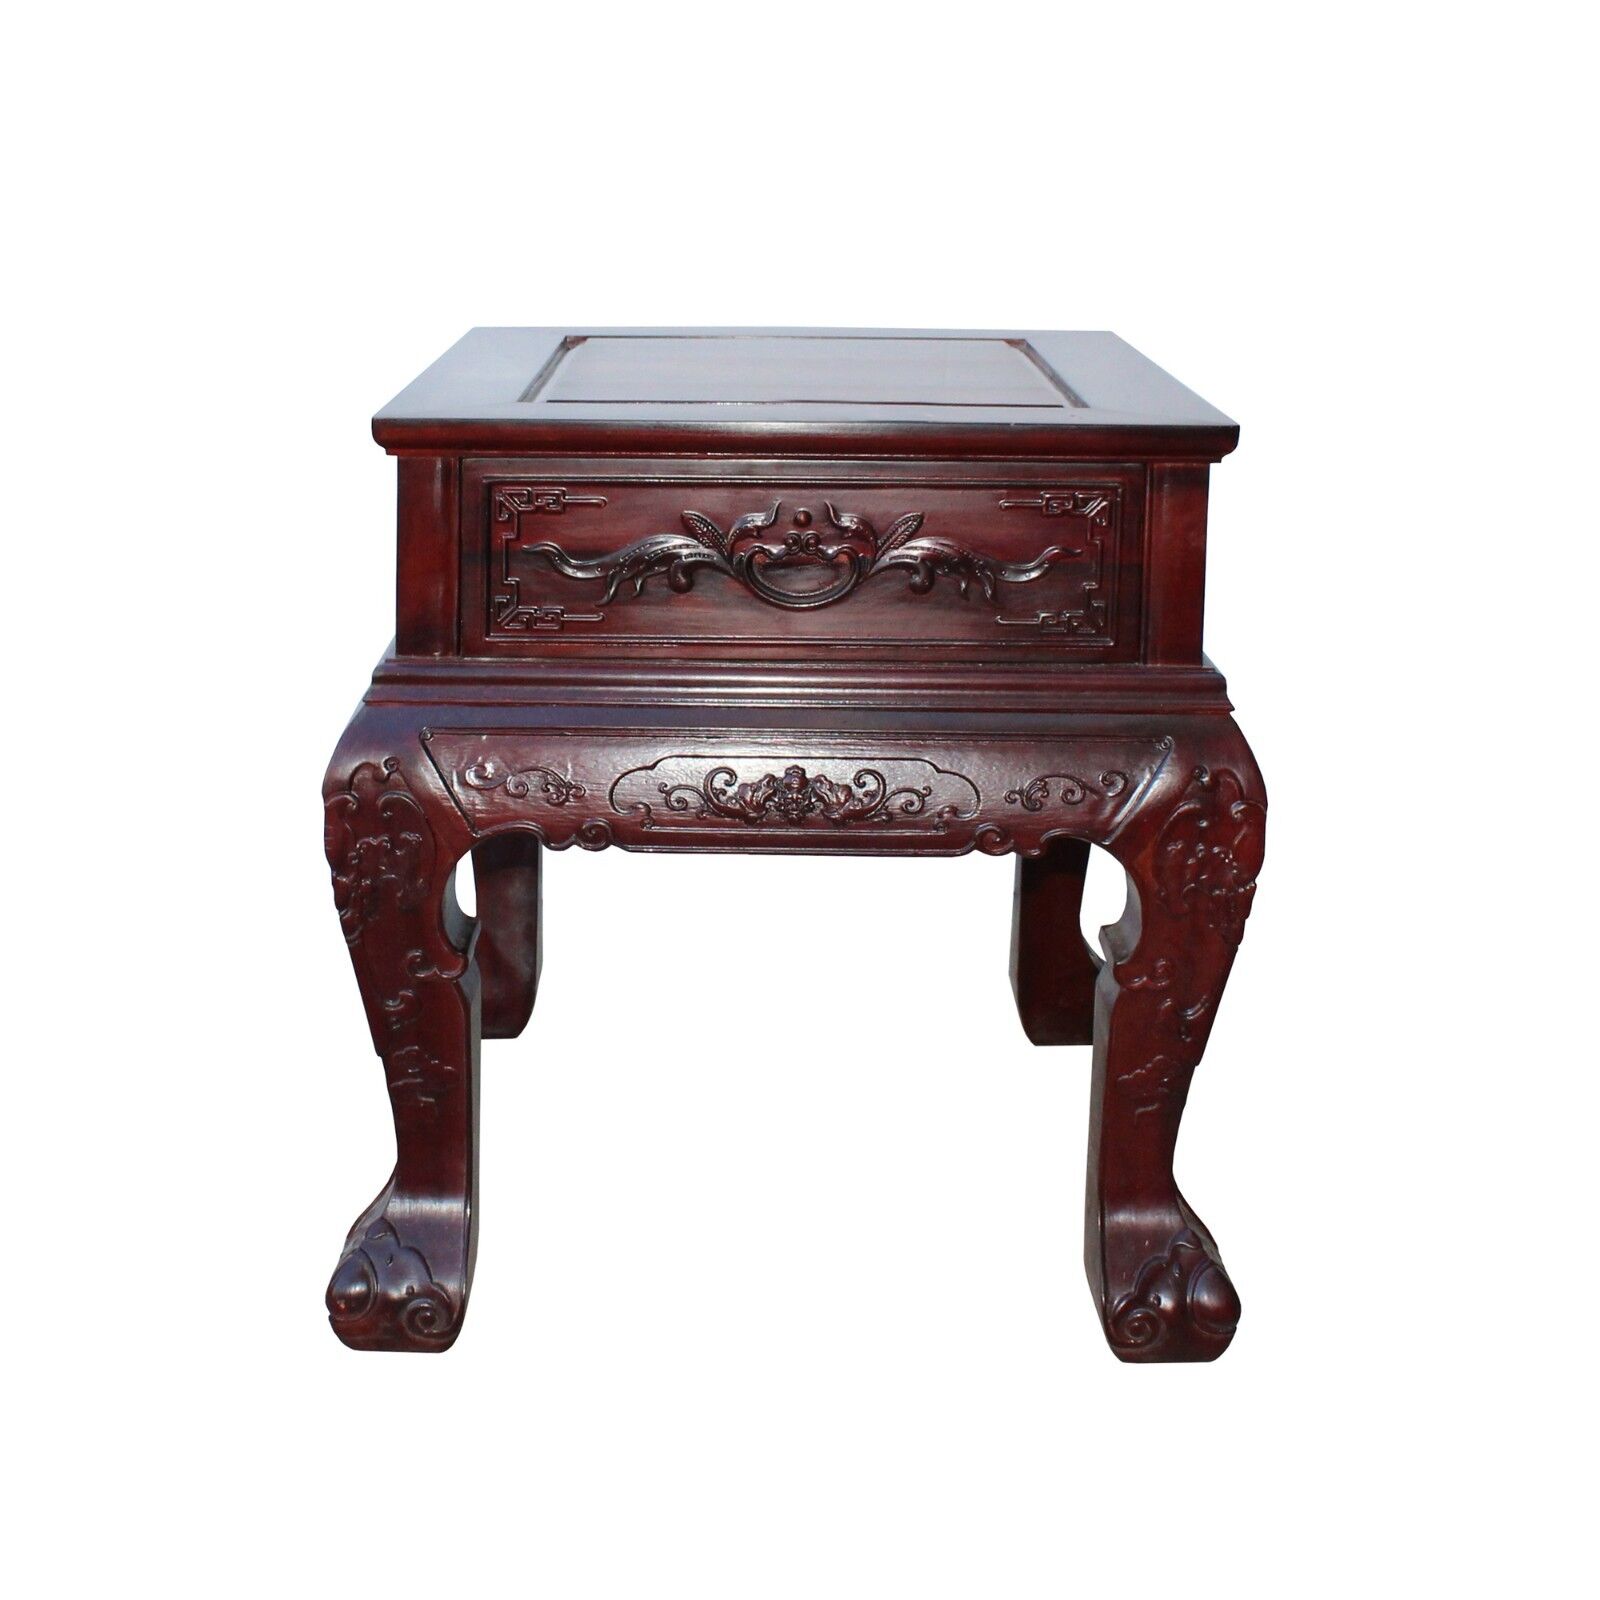 Chinese Oriental Suan Zhi Rosewood Foo Dogs Motif Tea Table Stand cs4536 Handmade Does Not Apply